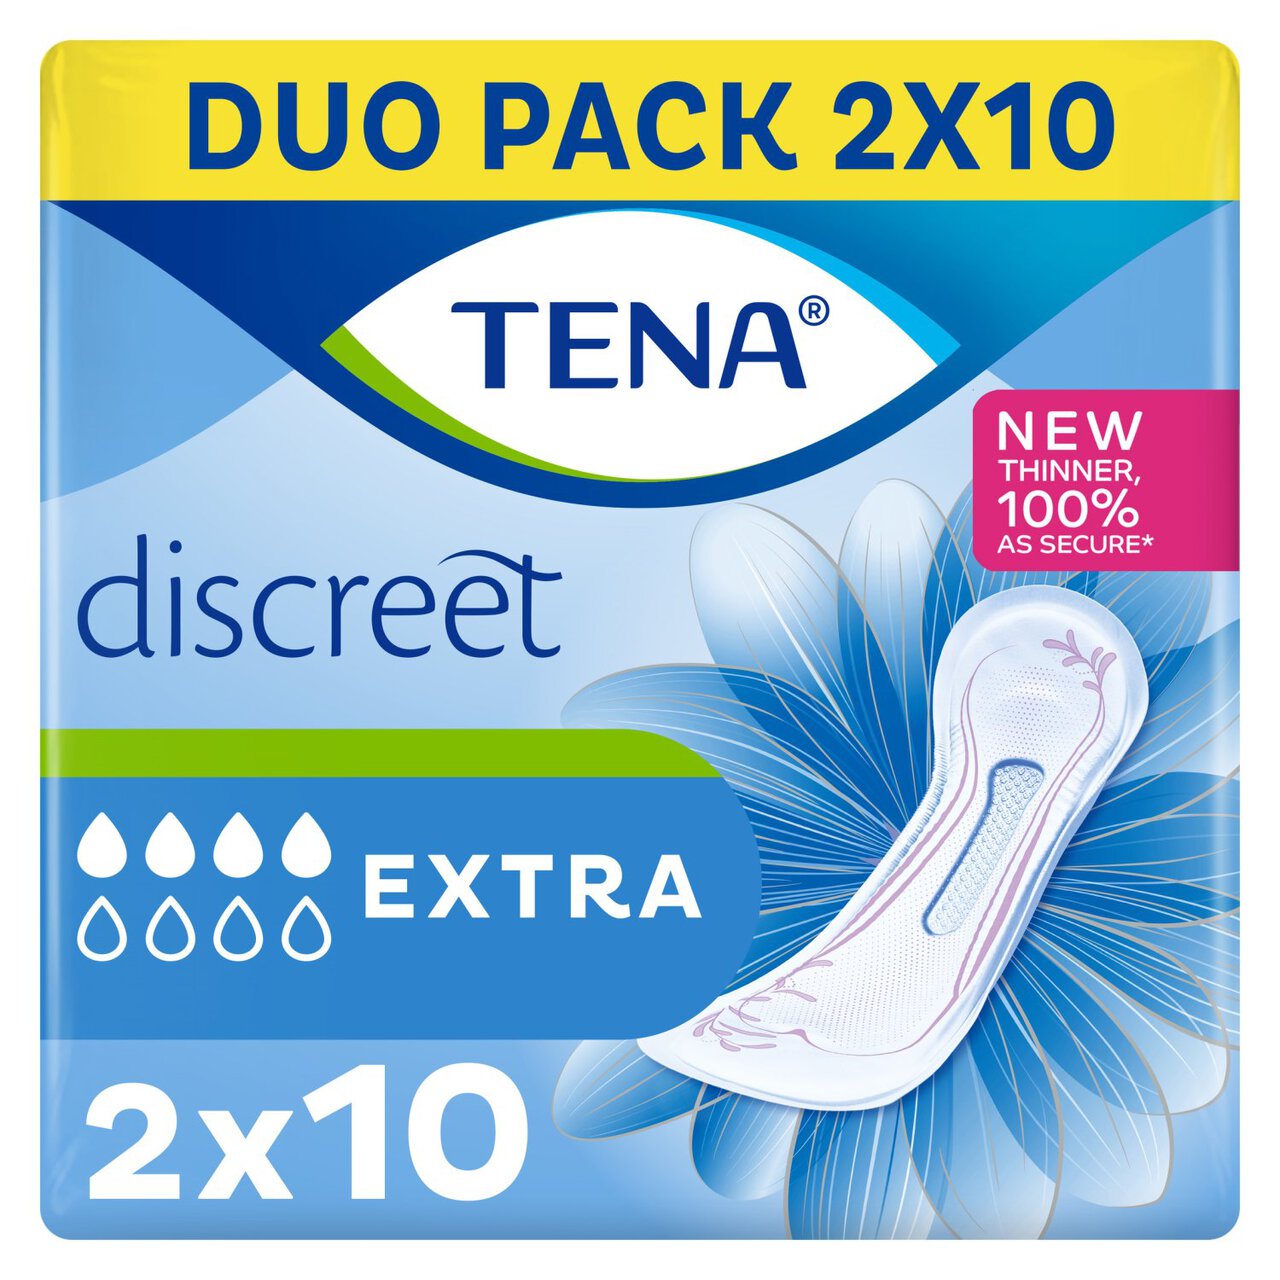 TENA Lady Discreet Extra incontinence Pads 2 x 10 per pack